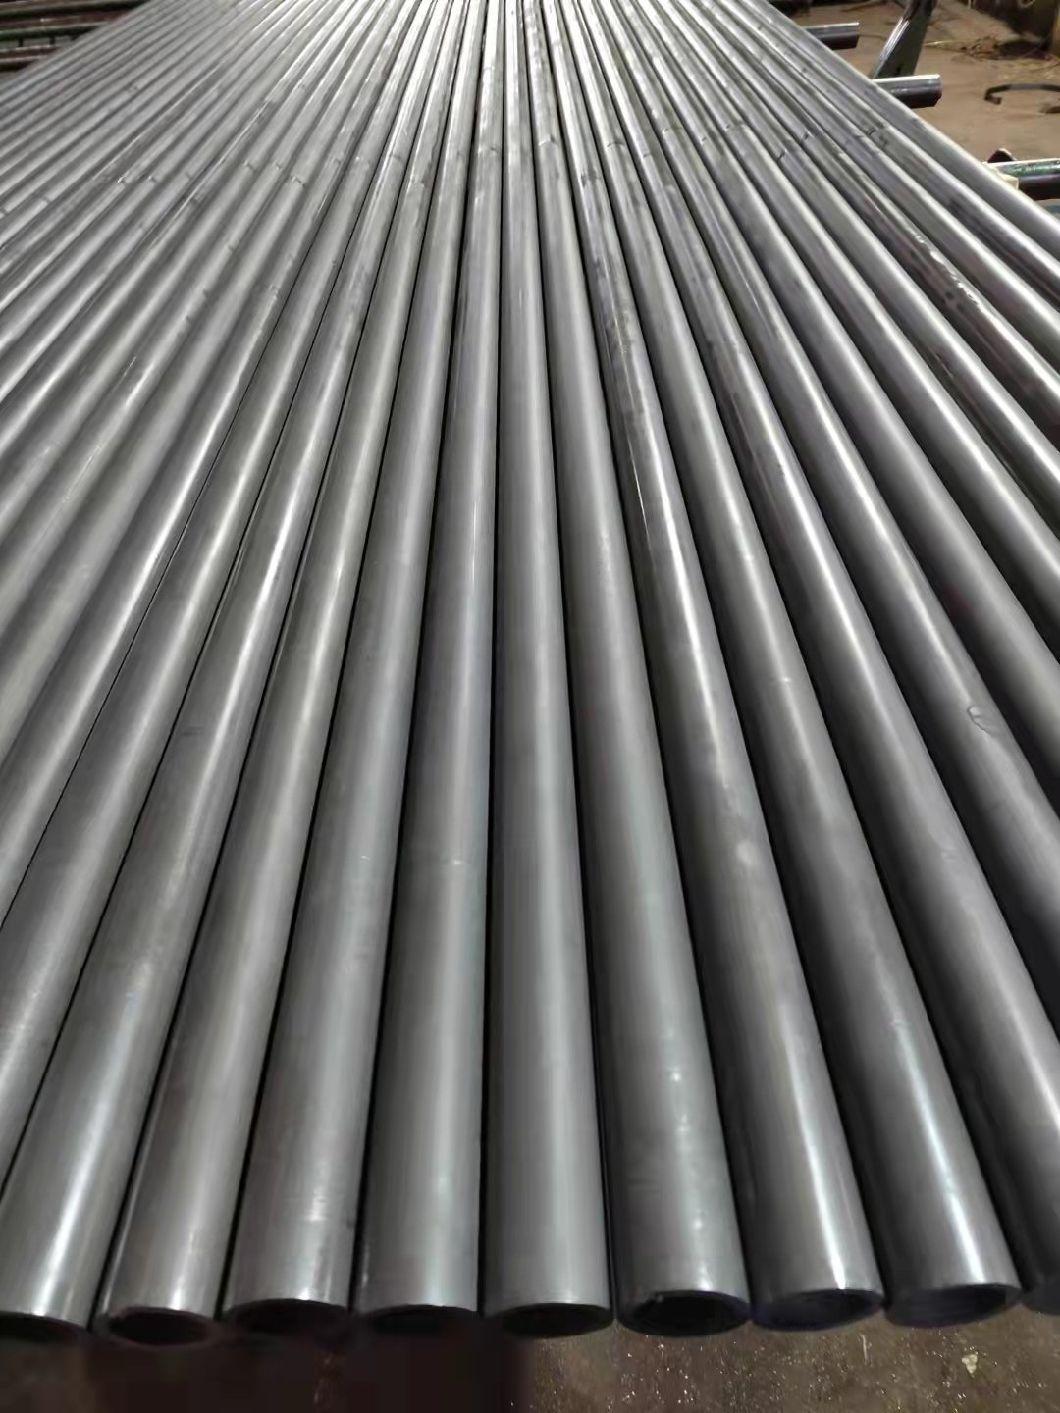 Bright Precision Seamless Stainless Steel Tube Made in China